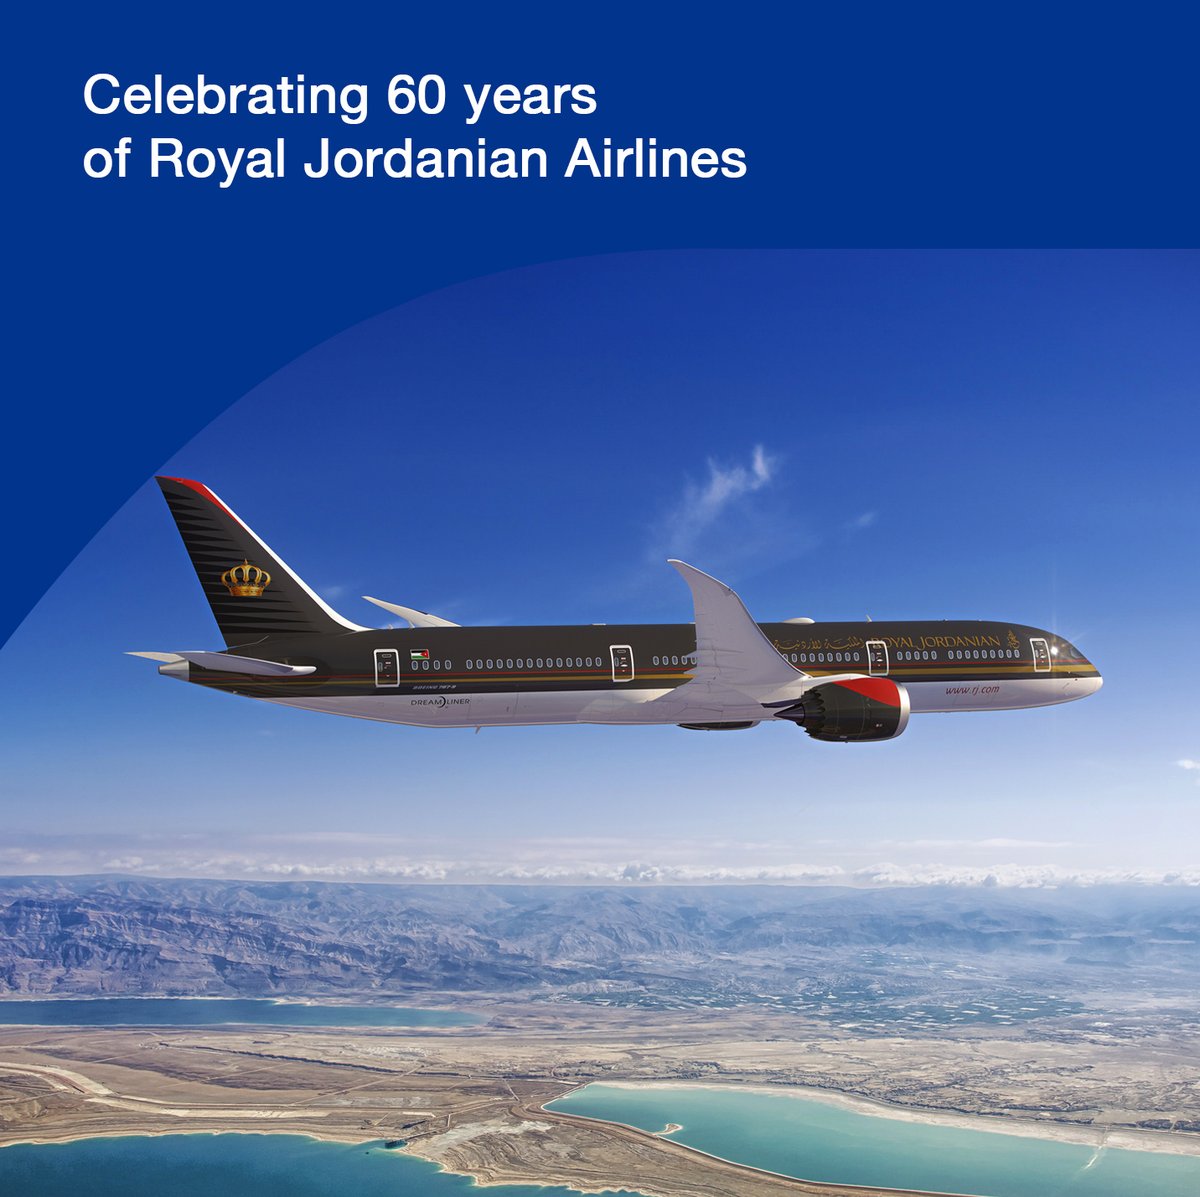 Congratulations @RoyalJordanian on 60 years of service and excellence. We're proud to be your partner and look forward to many more years of our airplanes flying in your livery. ✈